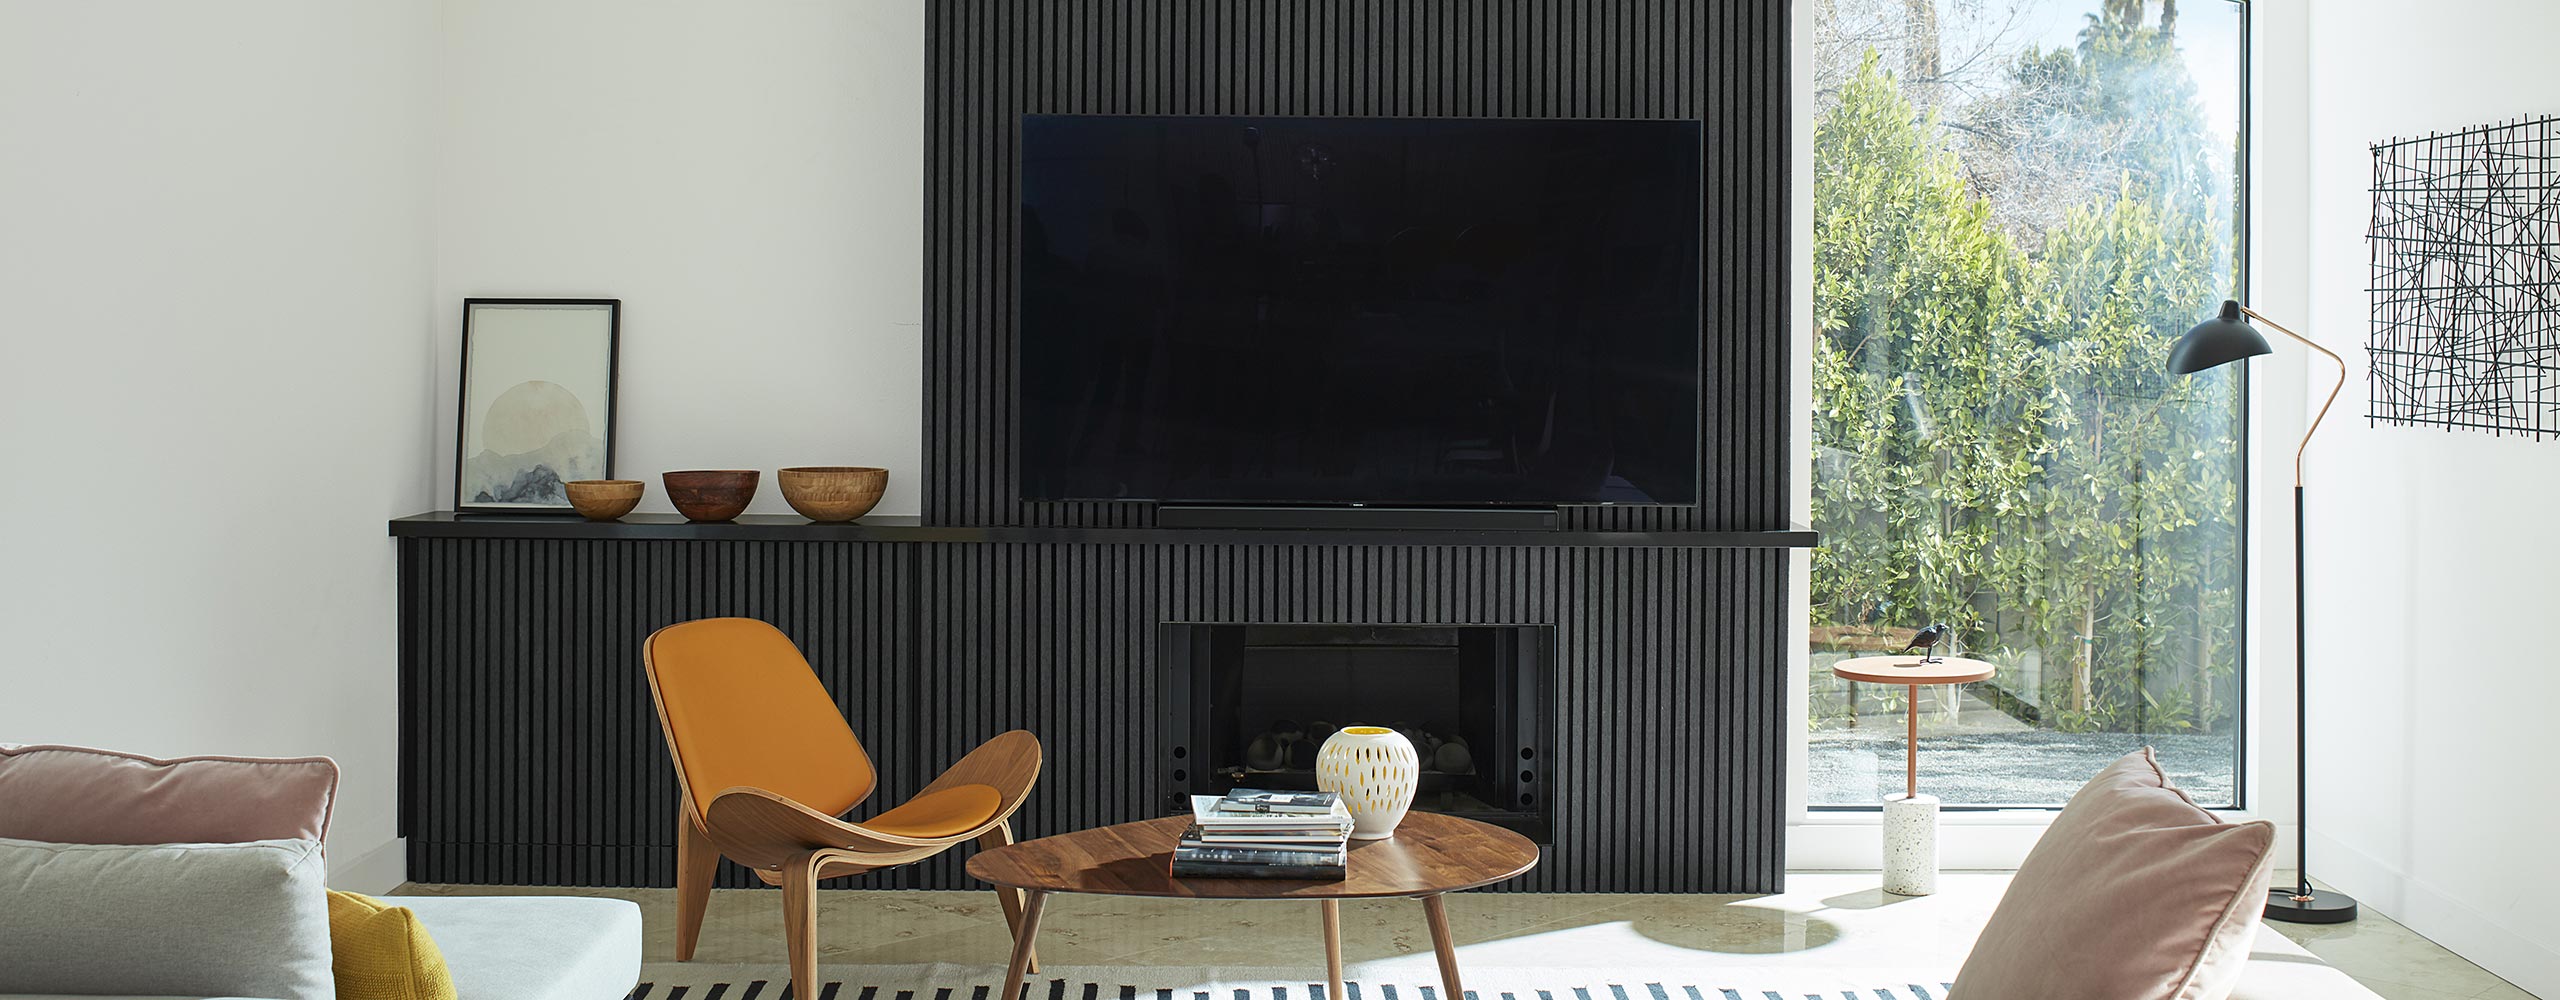 A mid-century modern style living room with bright, white-painted walls and vaulted ceiling, and a black panelled accent wall, built-in cabinet and fireplace, and large screen TV.